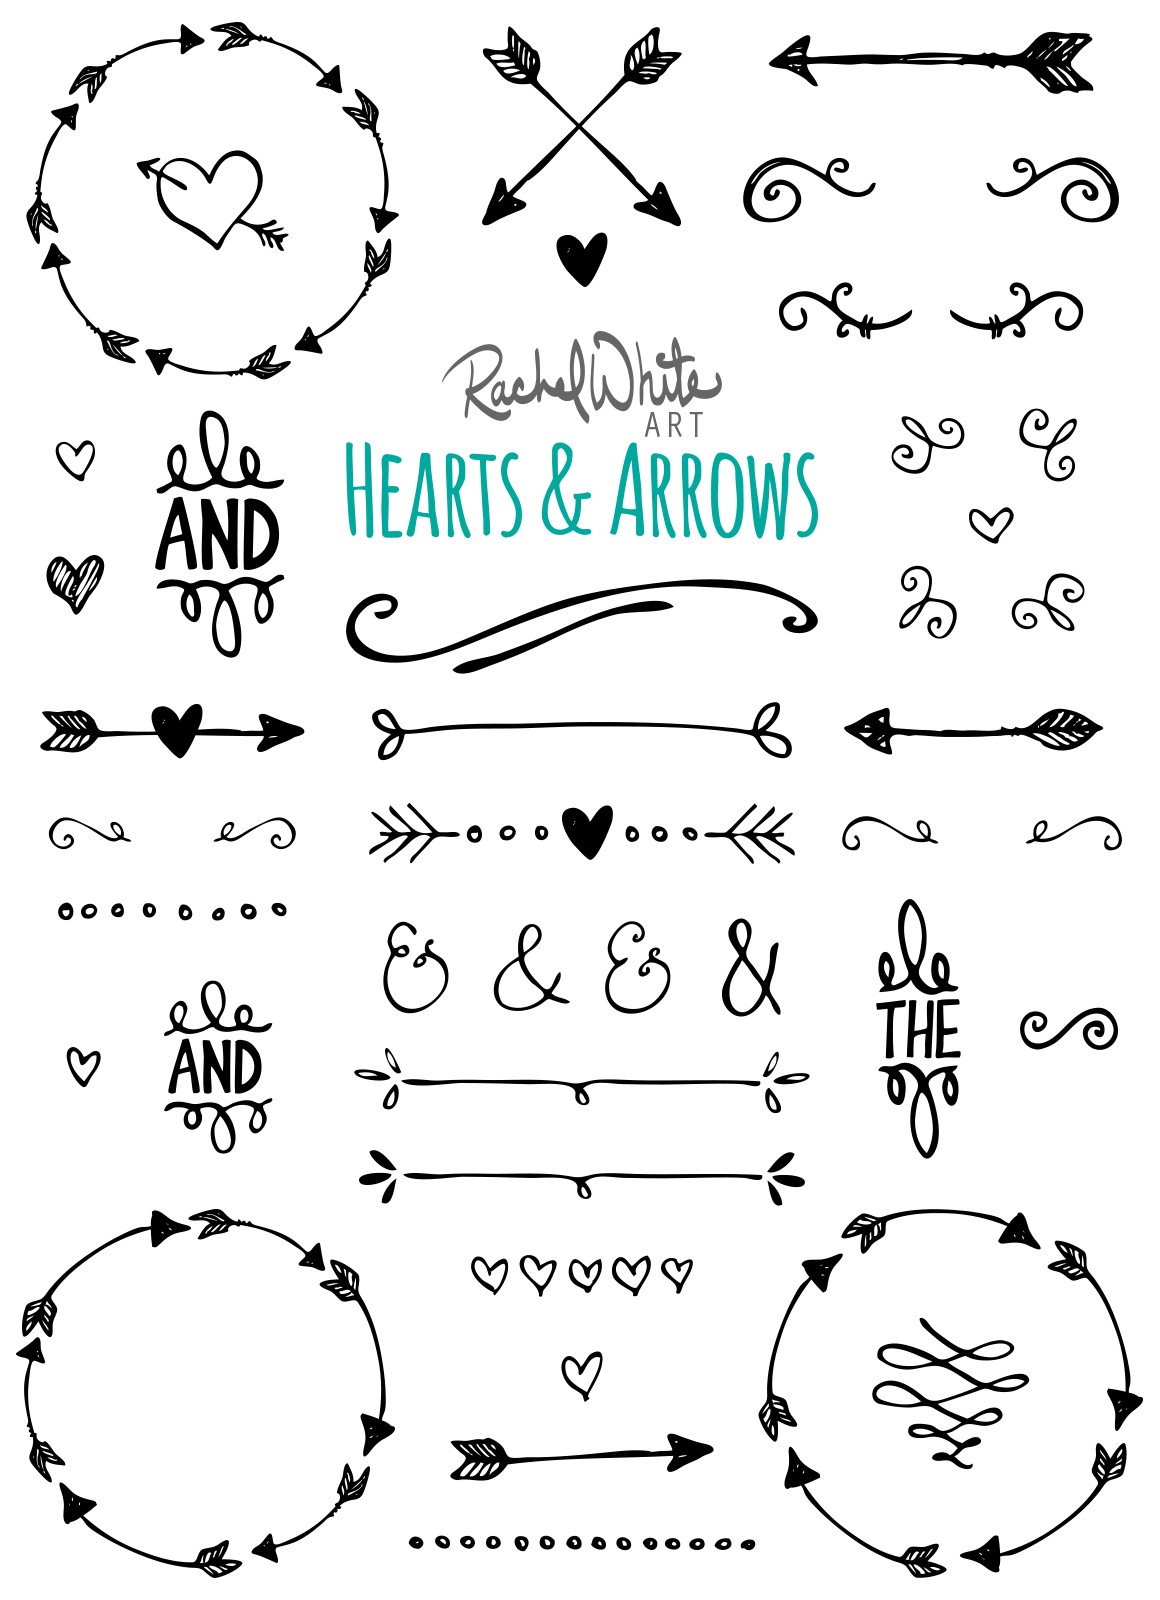 Hearts & Arrows - Vector & PNG ~ Illustrations on Creative Market